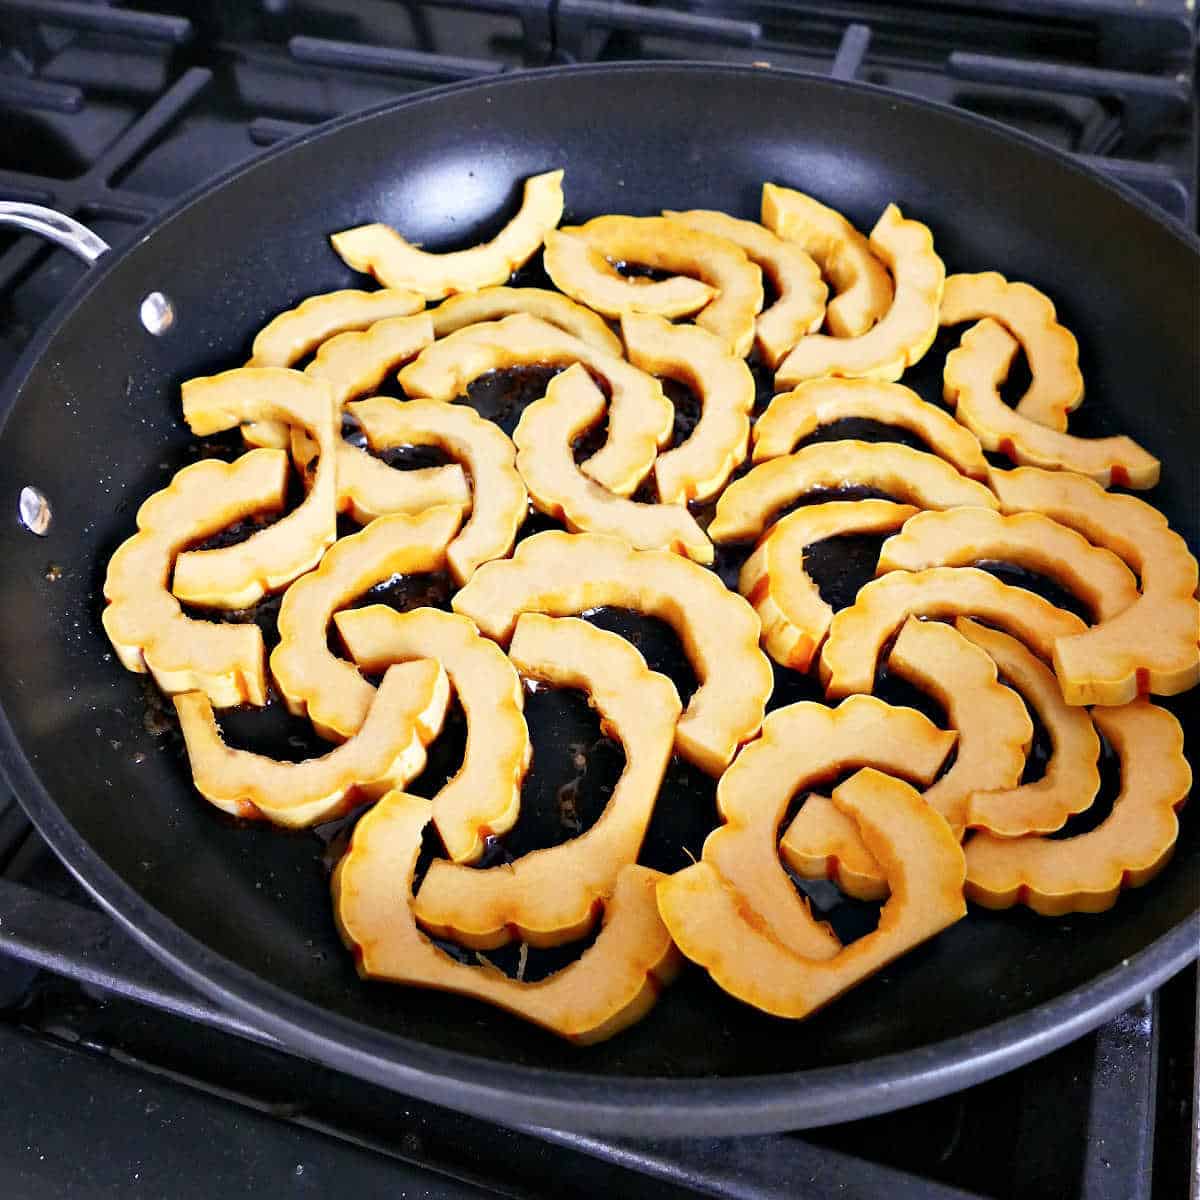 delicata squash pieces added to a skillet with oil, cinnamon, and sage